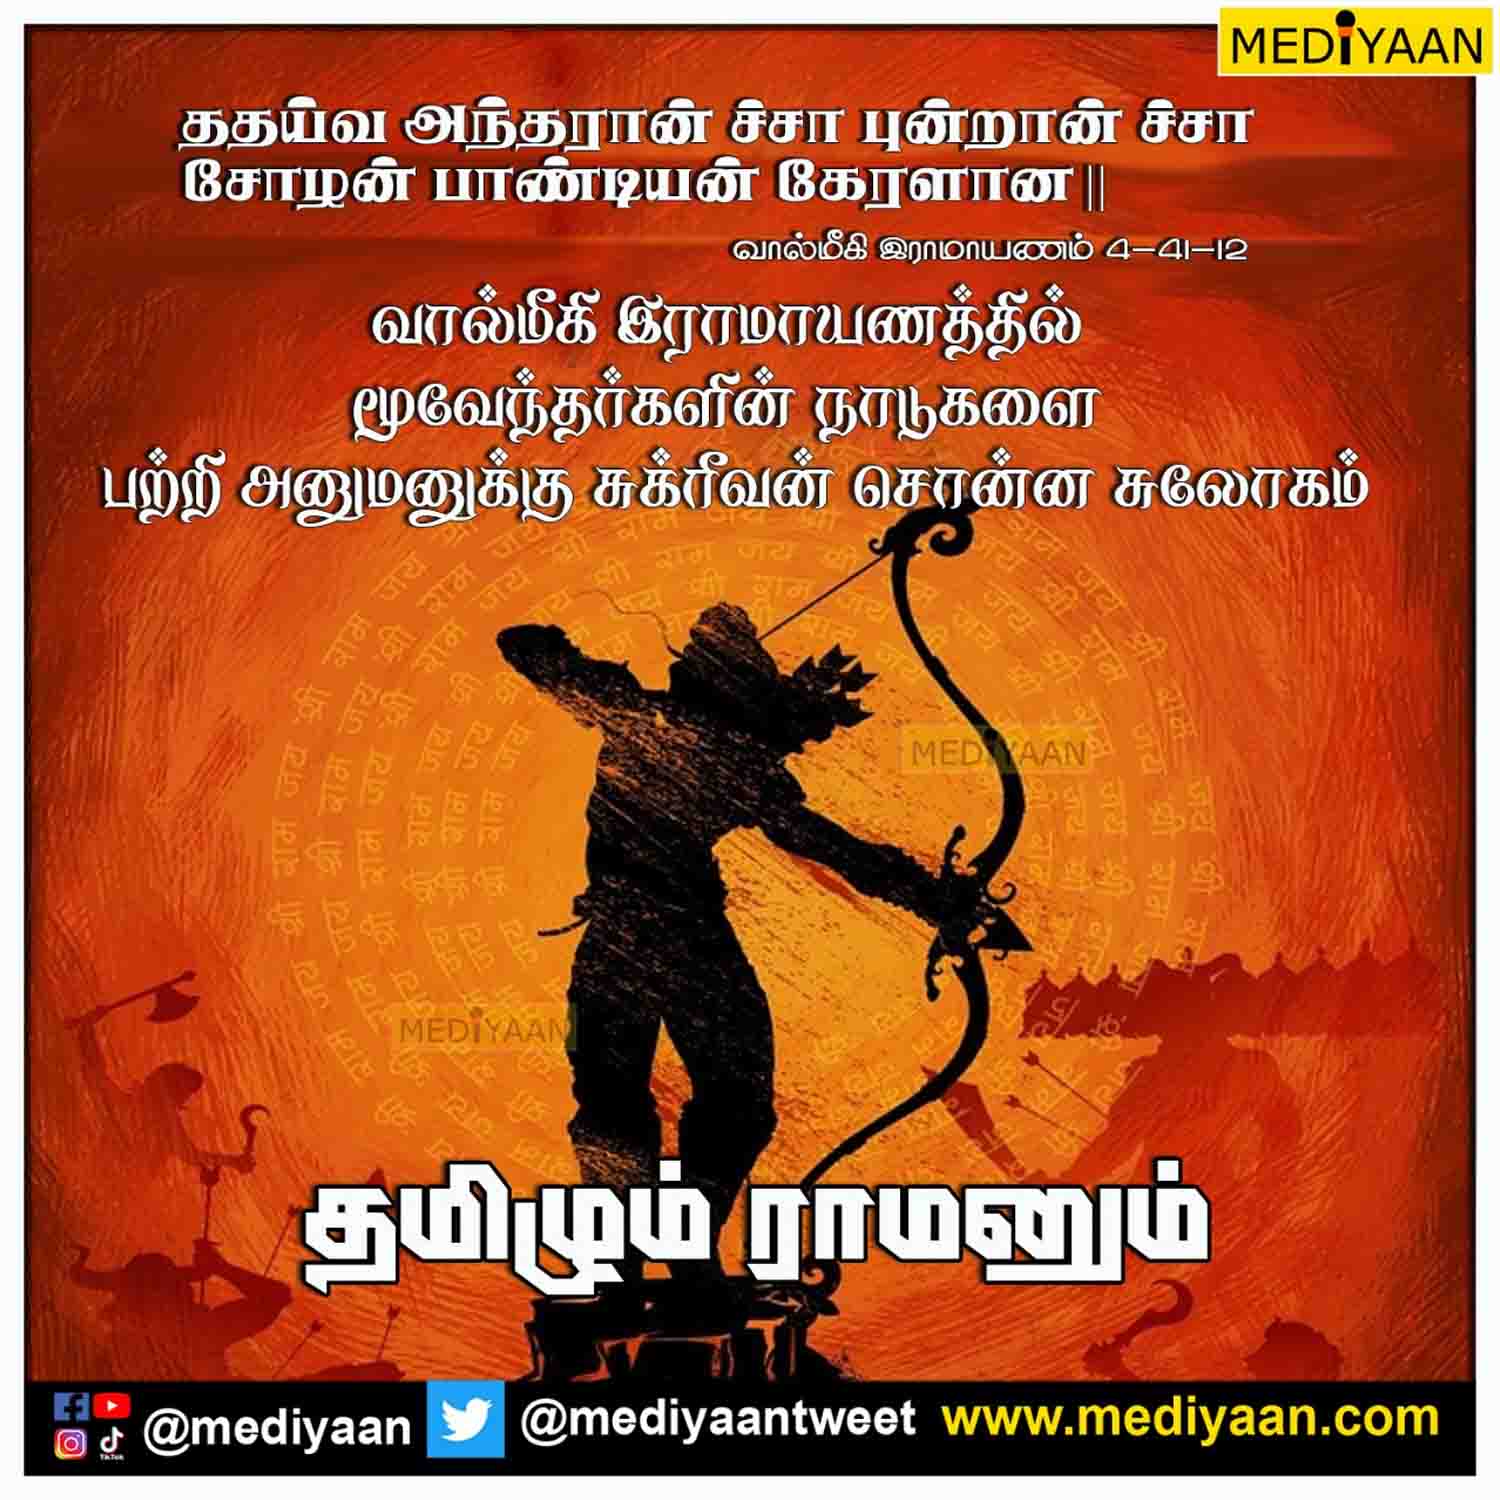 THE TIME WHEN LORD RAMA SAVED THE TAMILIANS